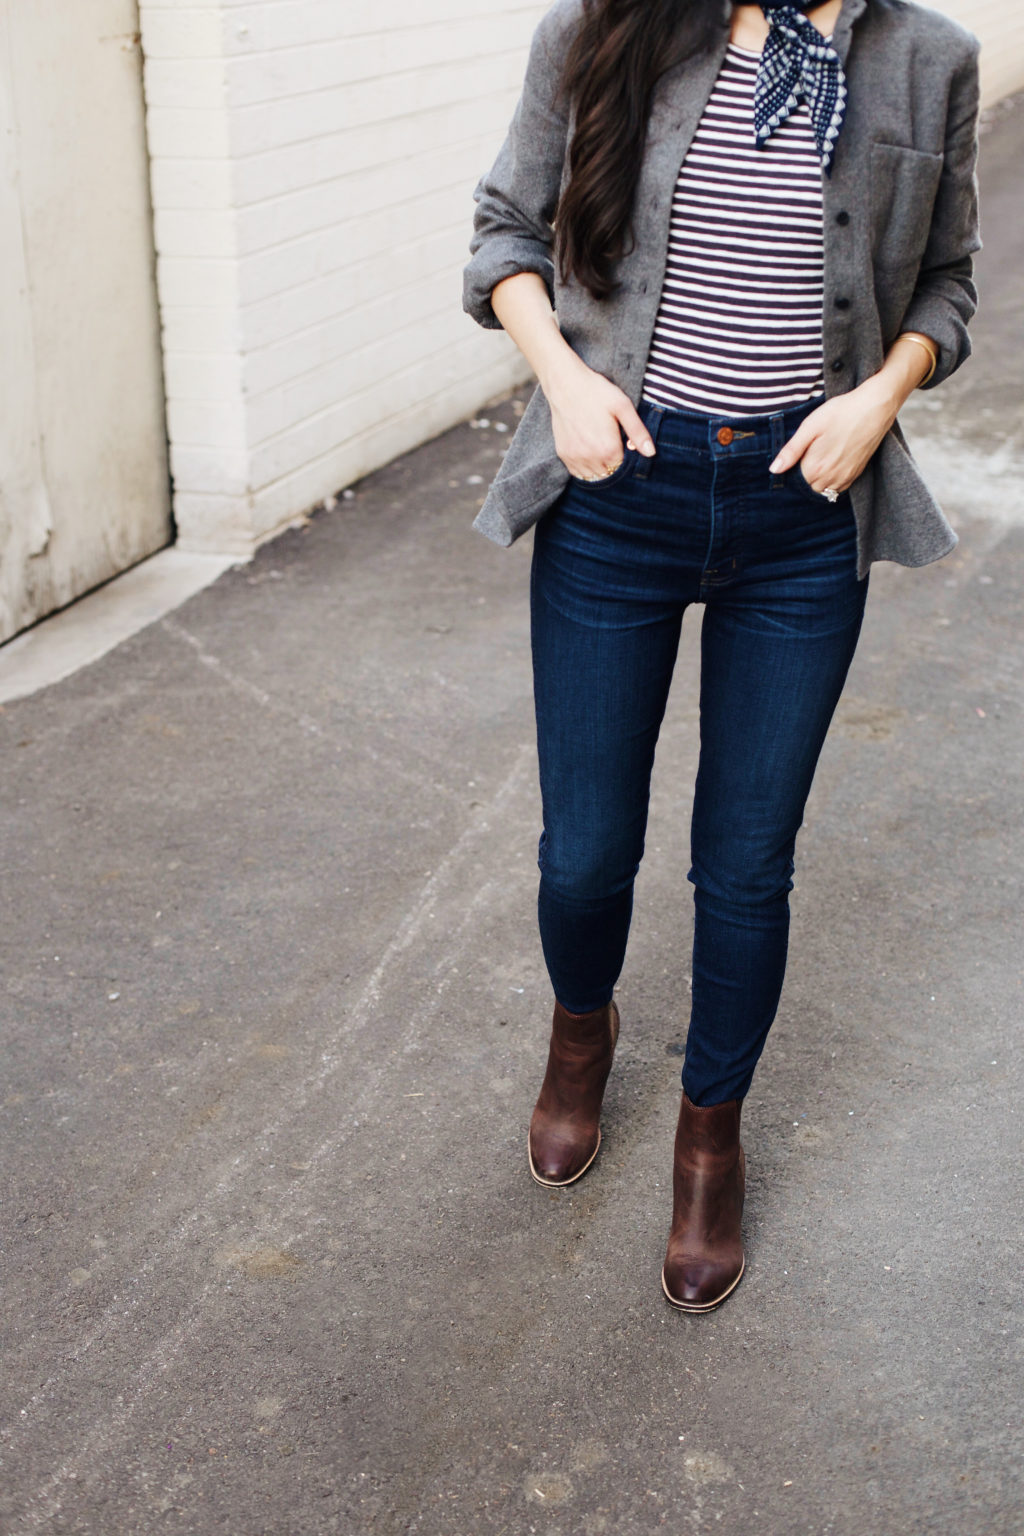 New Darlings - Fall Fashion - Layers and stripes - Clark's boots